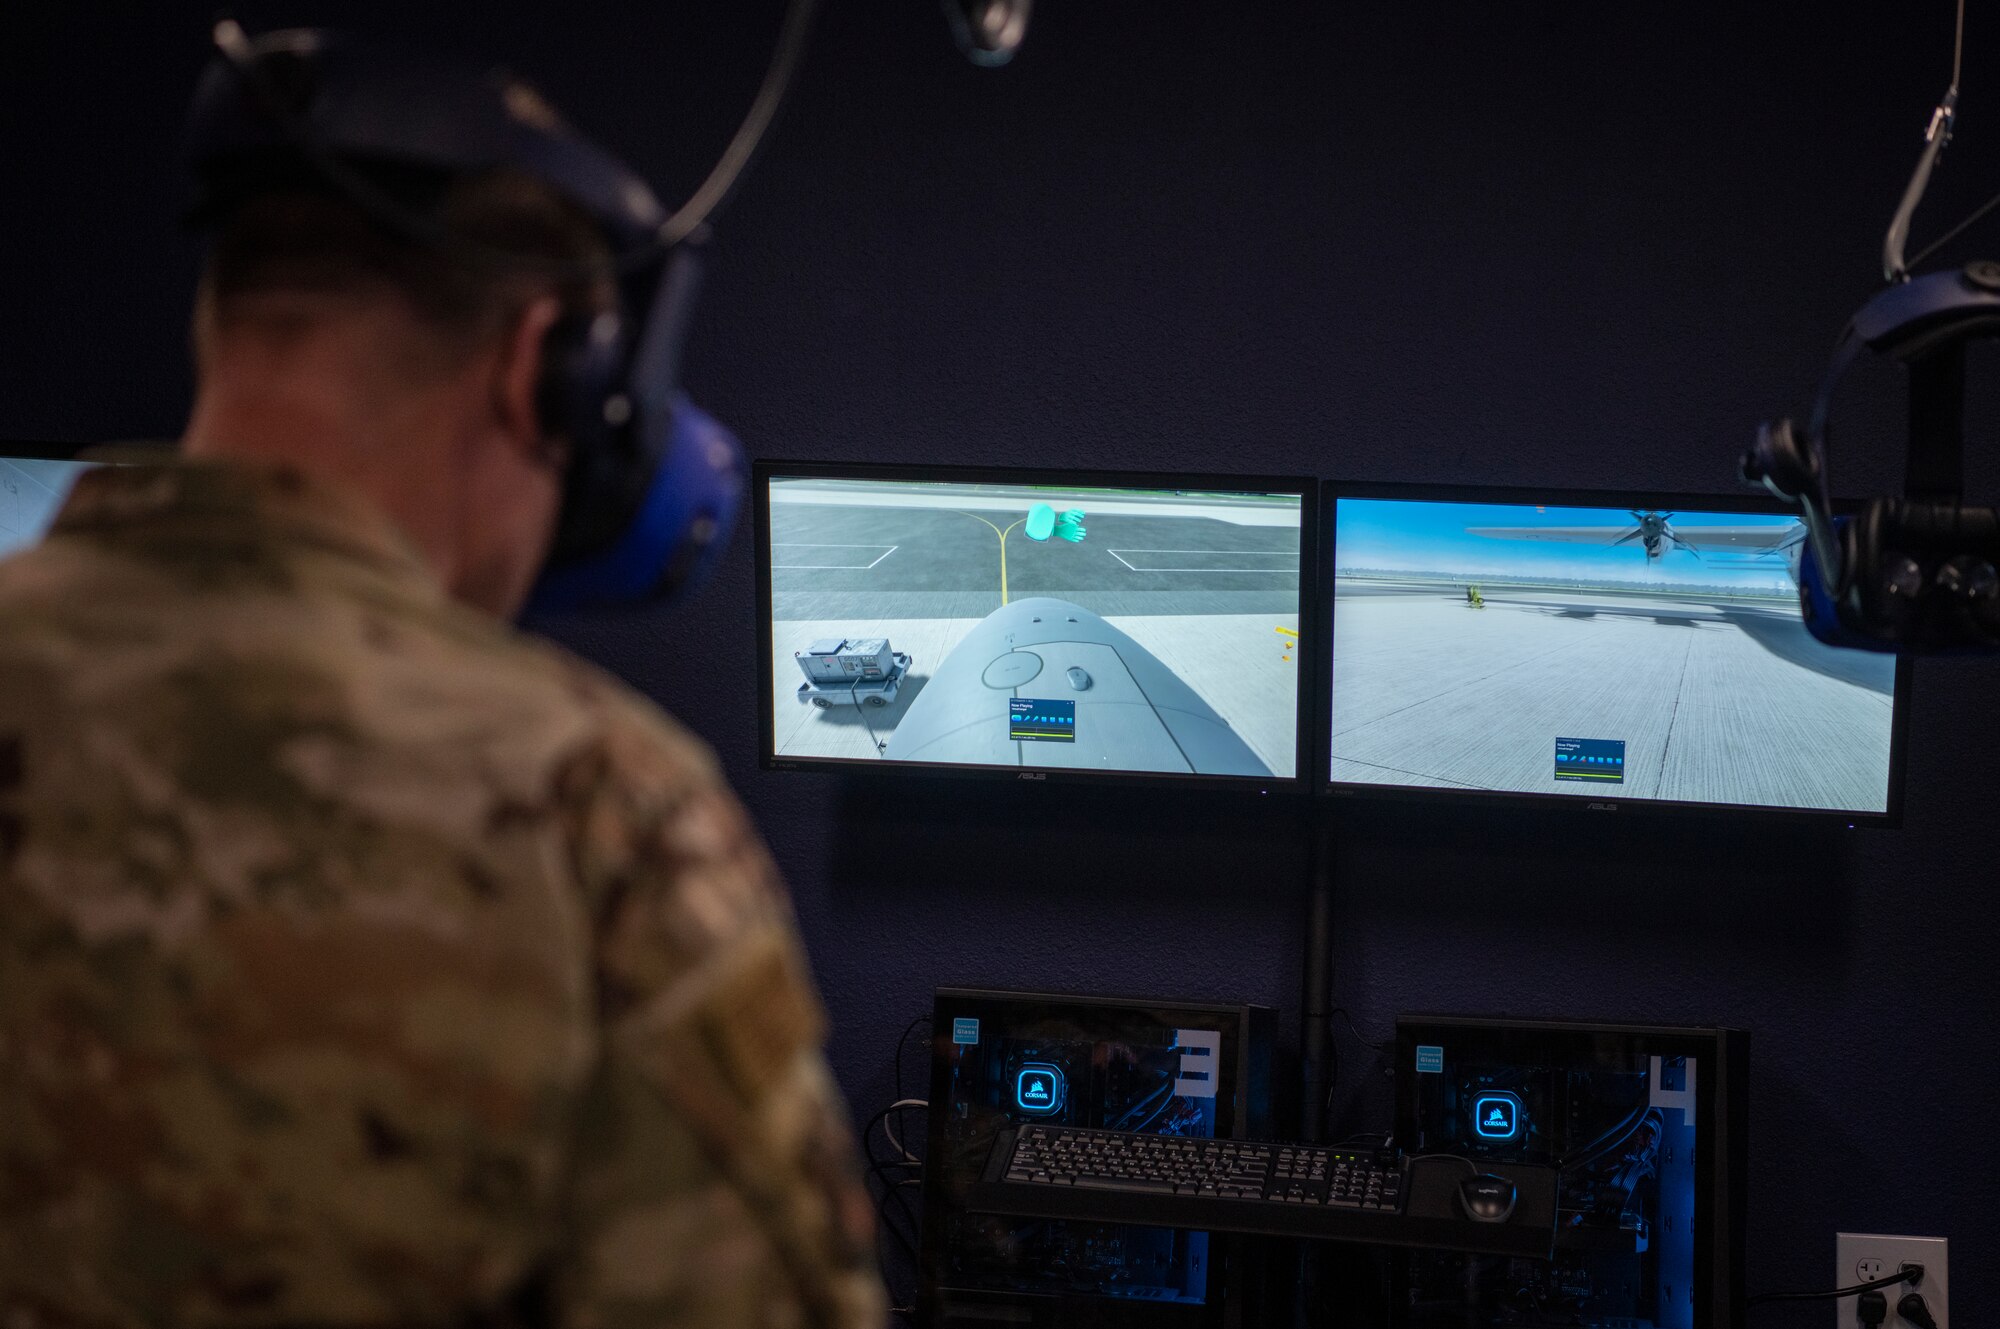 Chief Master Sgt. Chad Bickley, 18th Air Force command chief, stands on a virtual C-130J Super Hercules wing inside a virtual reality headset at Dyess Air Force Base, Texas, Mar. 3, 2021.